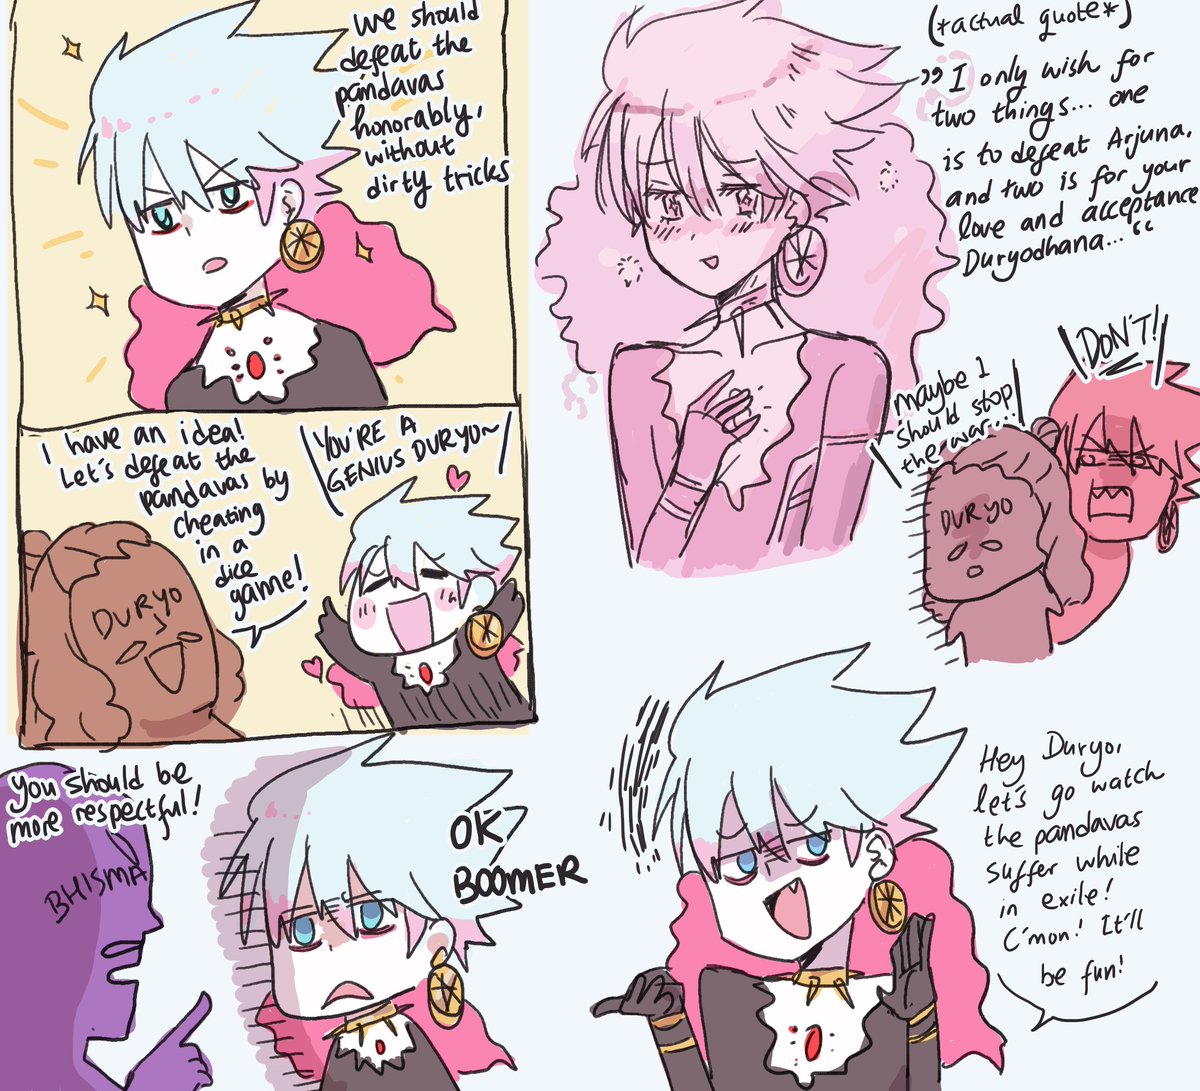 While reading the Mahabharata, I really can't imagine FGO!Karna doing all the stuff that MHB!Karna did, so I drew some memorable scenes to help me visualize it. They feel like completely different characters 